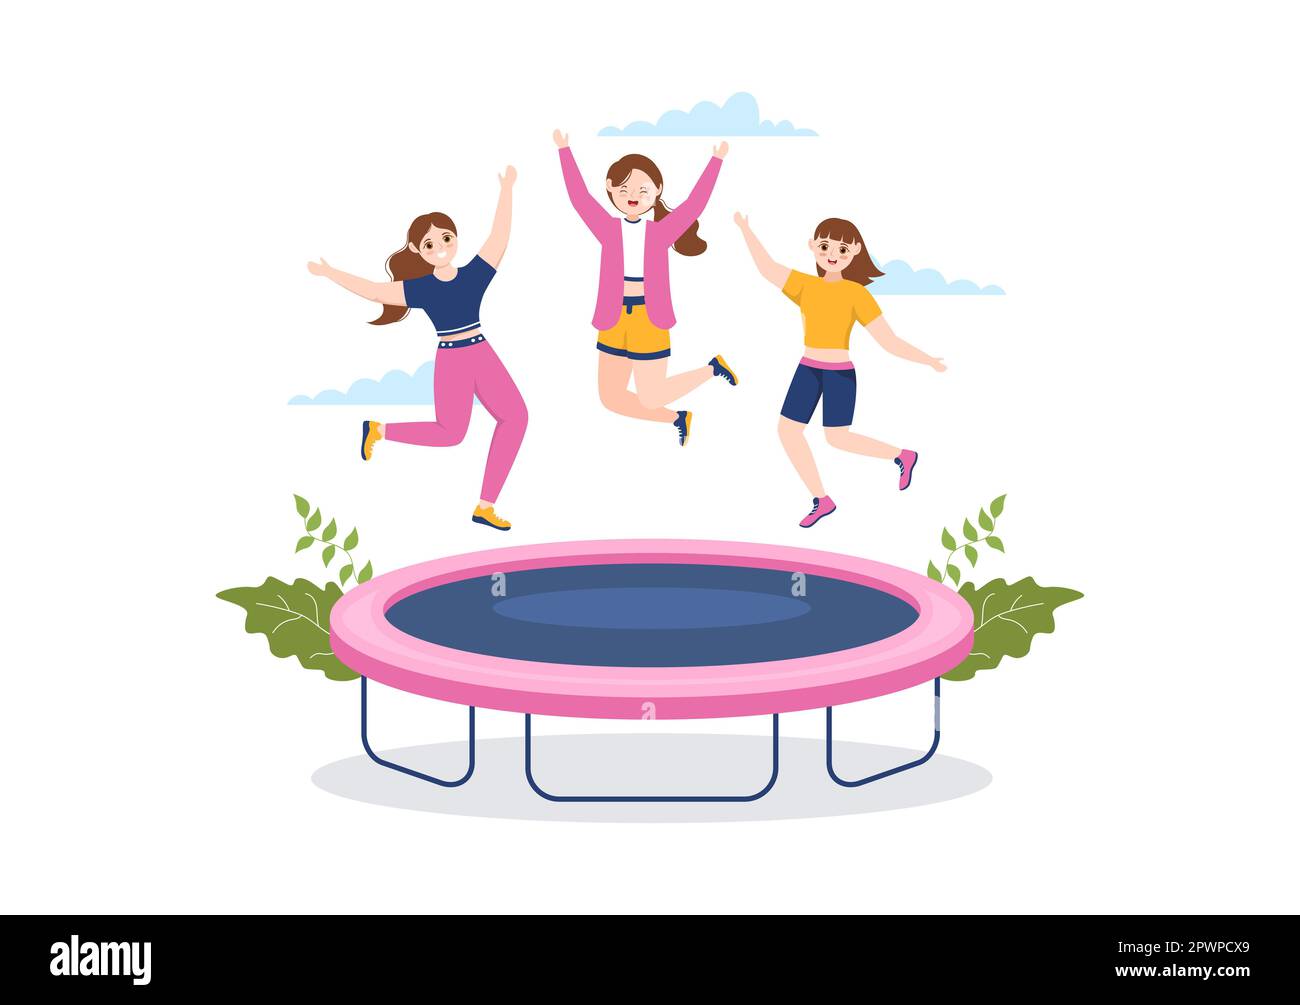 Trampoline Illustration with Youth Jumping On a Trampolines in Hand Drawn  Flat Cartoon Summer Outdoor Activity Background Template Stock Photo - Alamy